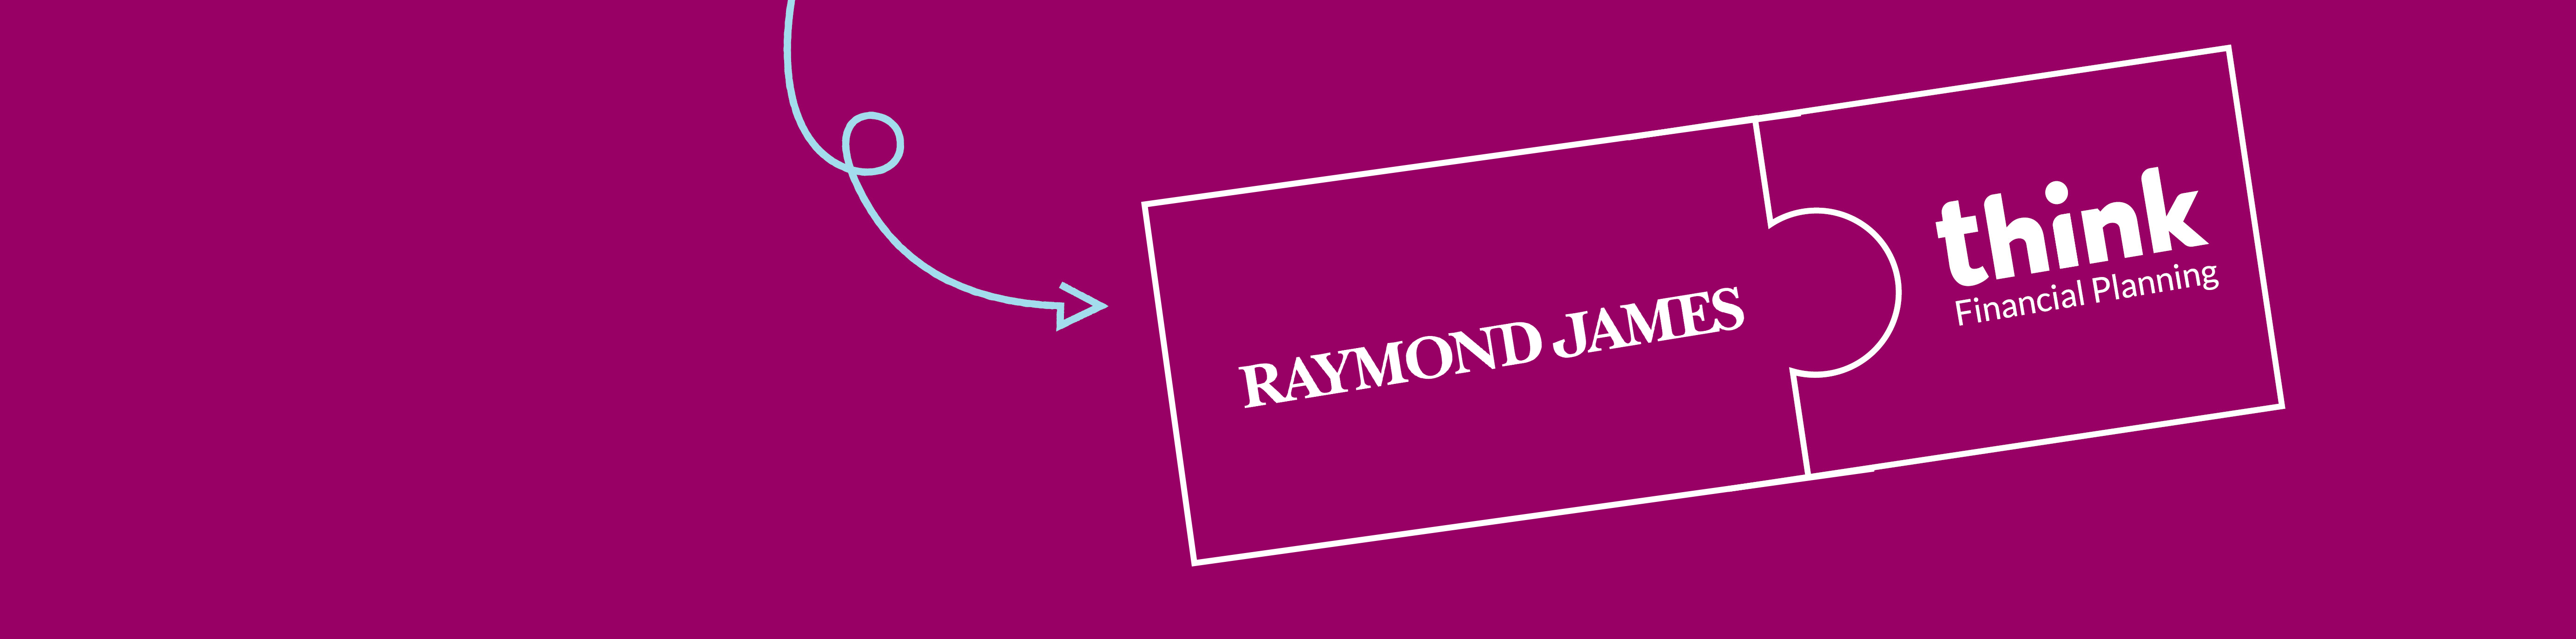 Raymond James and Think Financial Planning